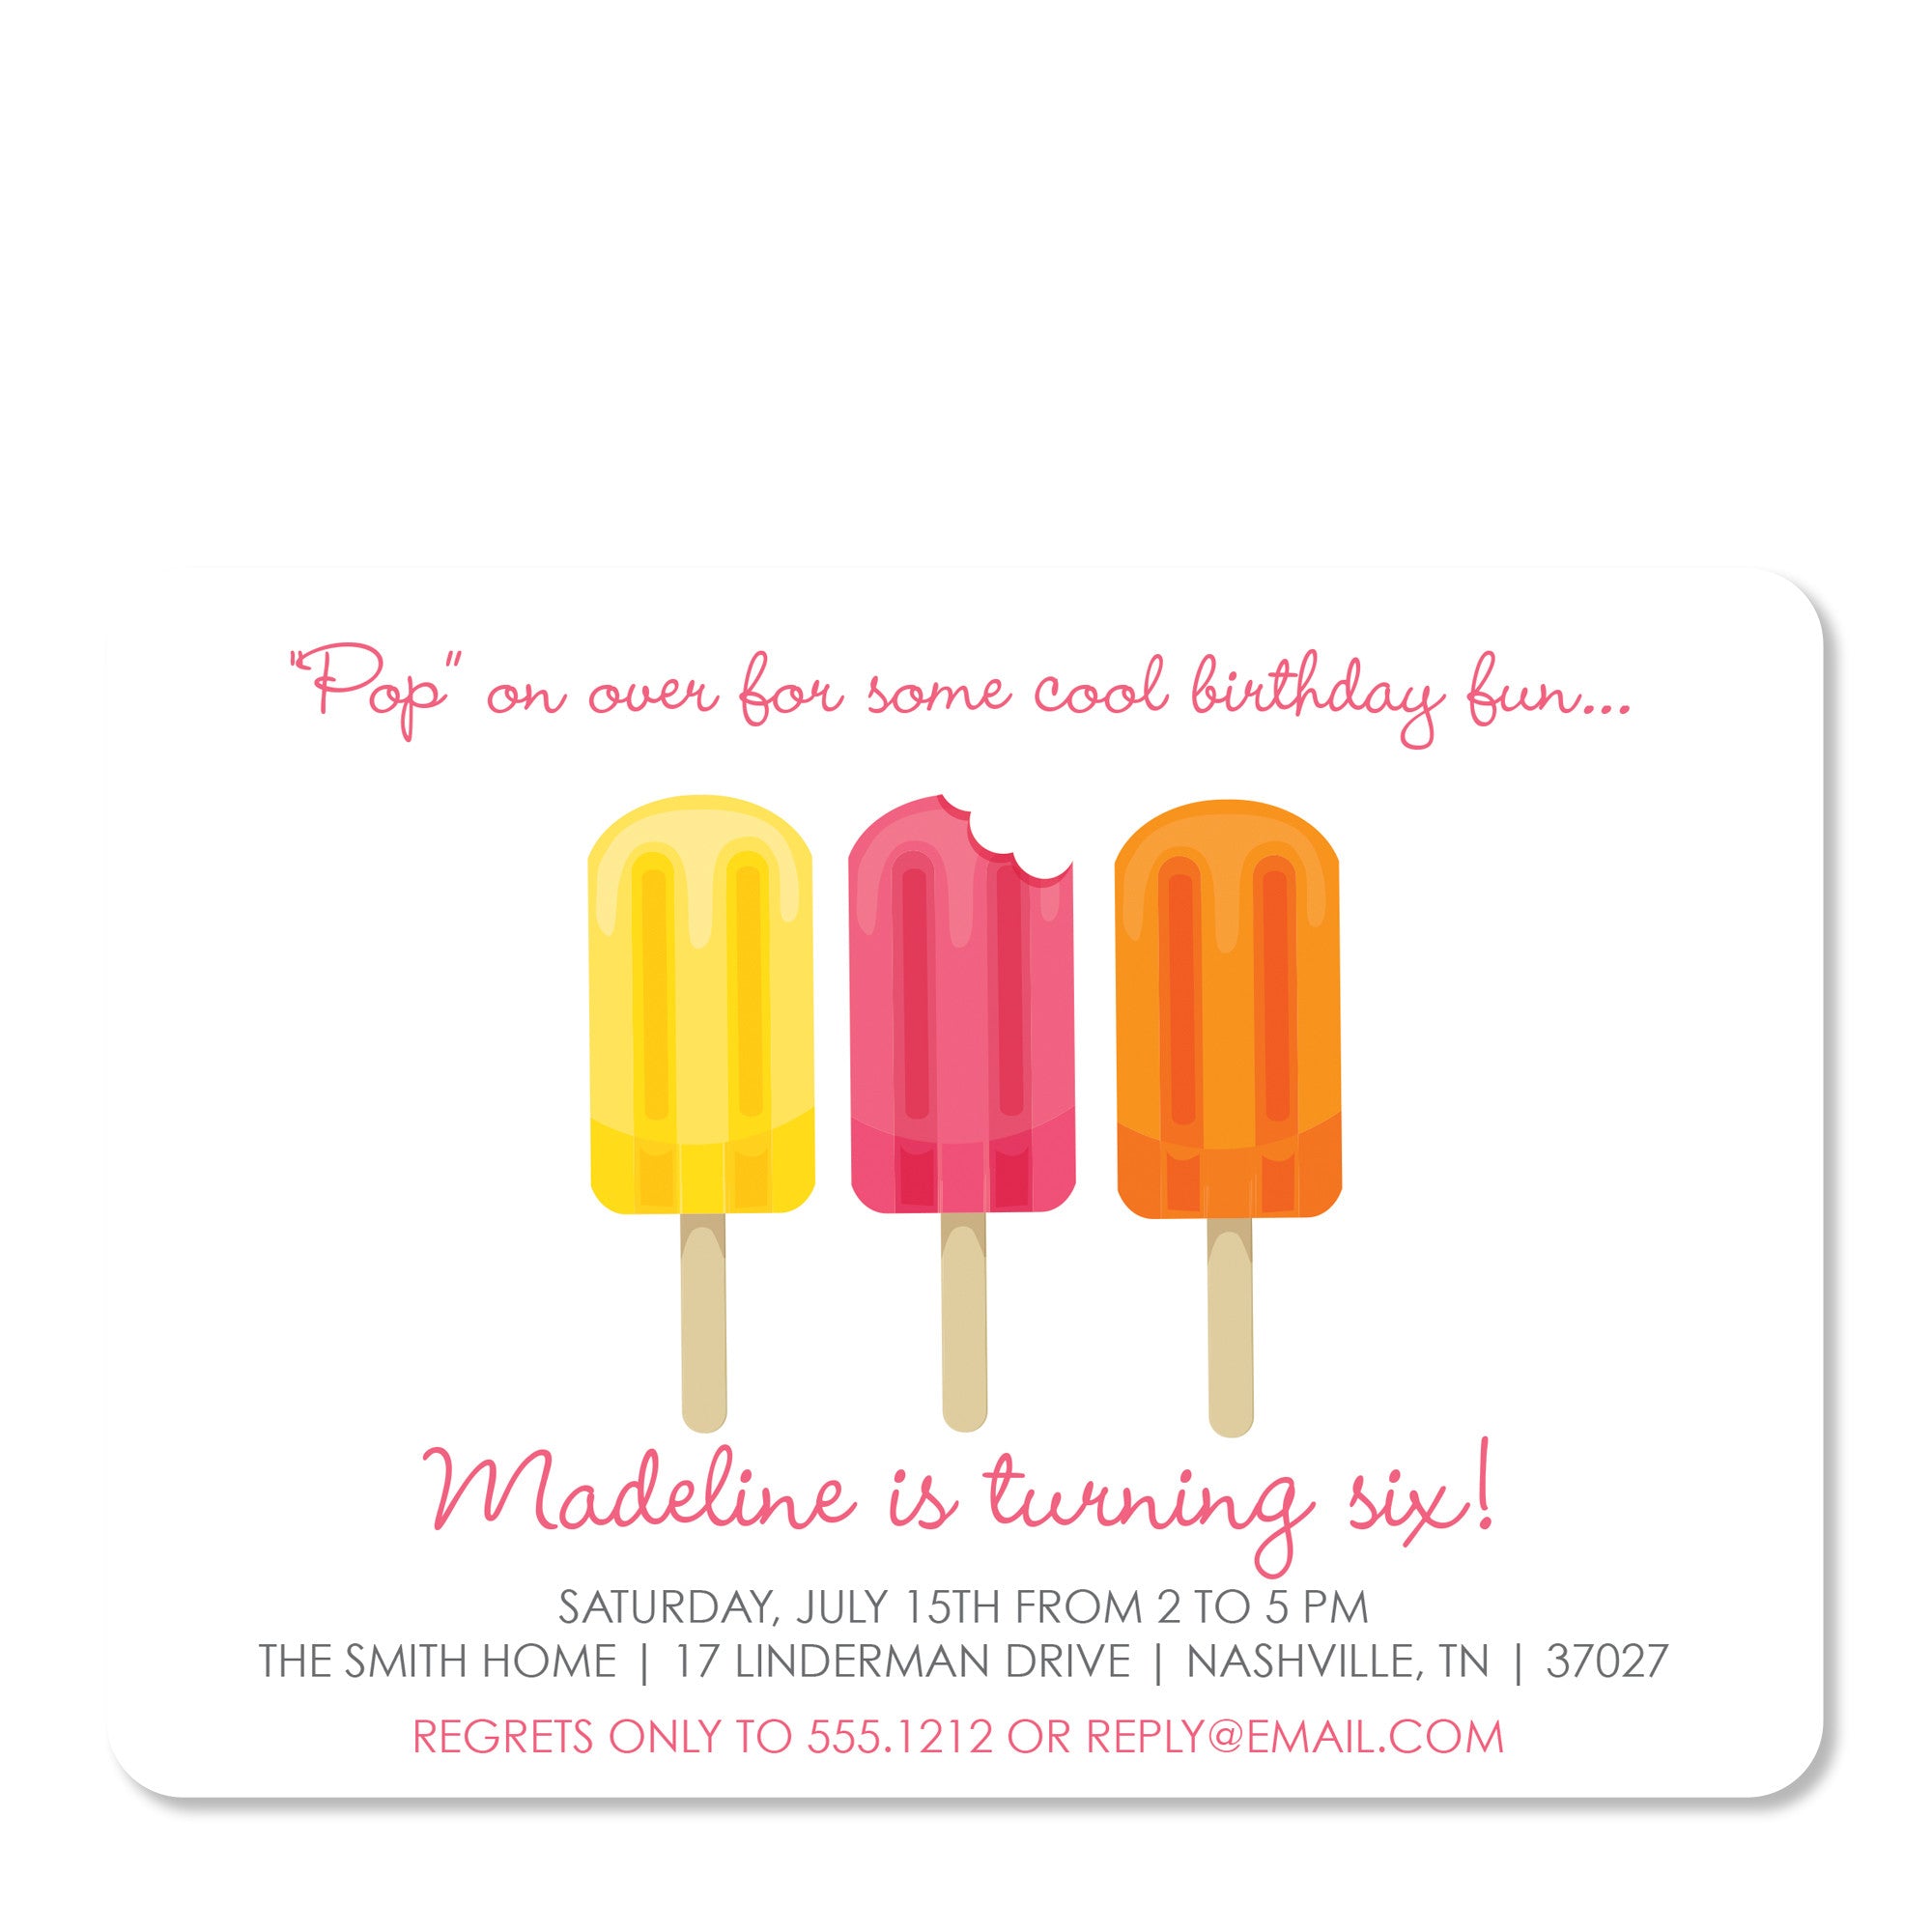 Popsicle Party Invitation | Pipsy.com | Pink, Orange & Yellow